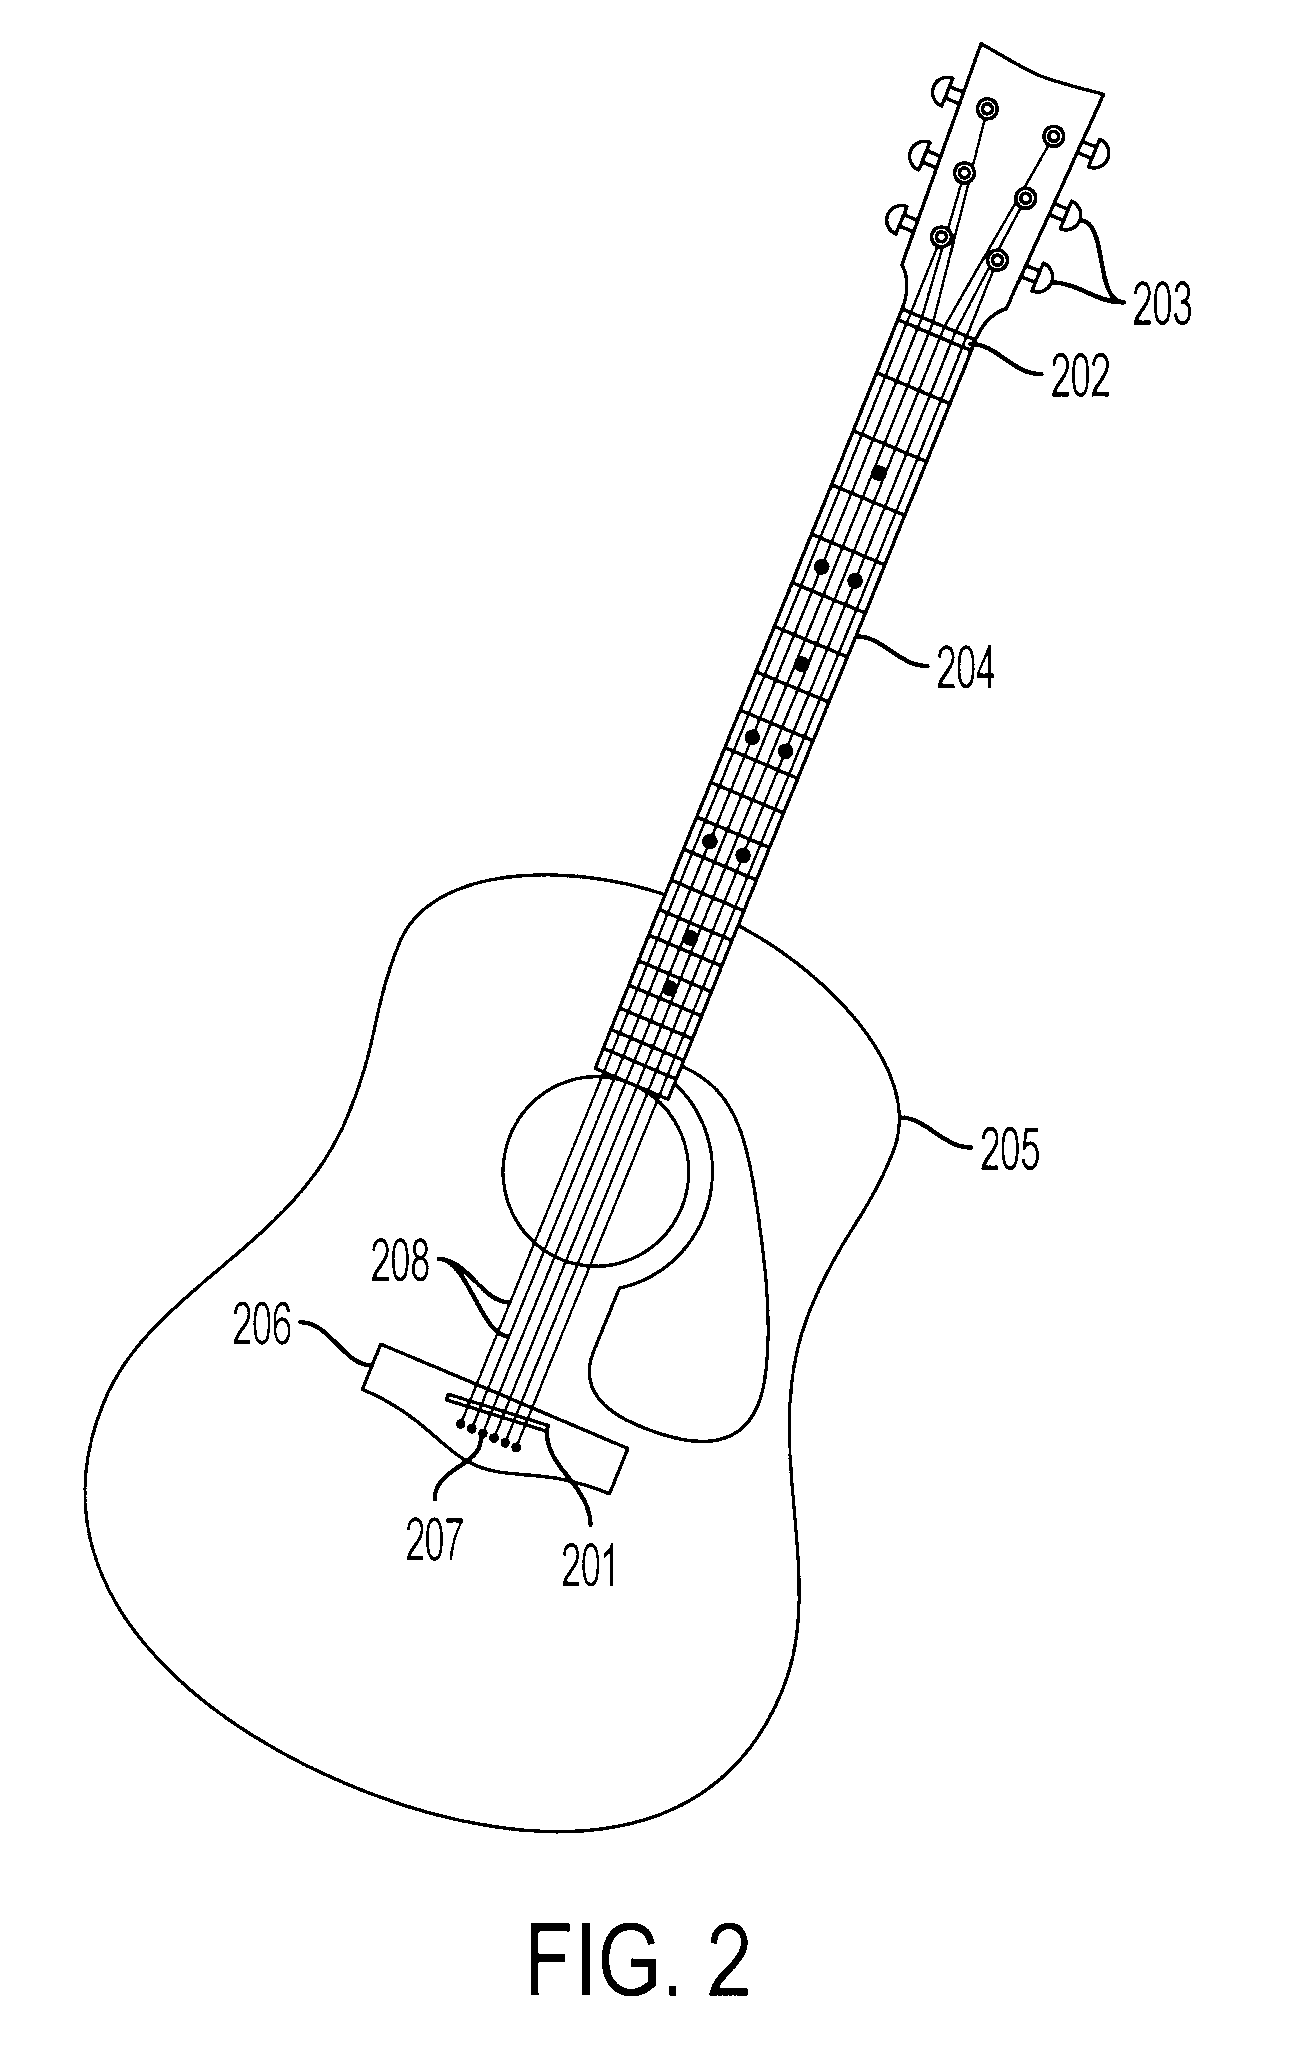 System and method for remotely generating sound from a musical instrument